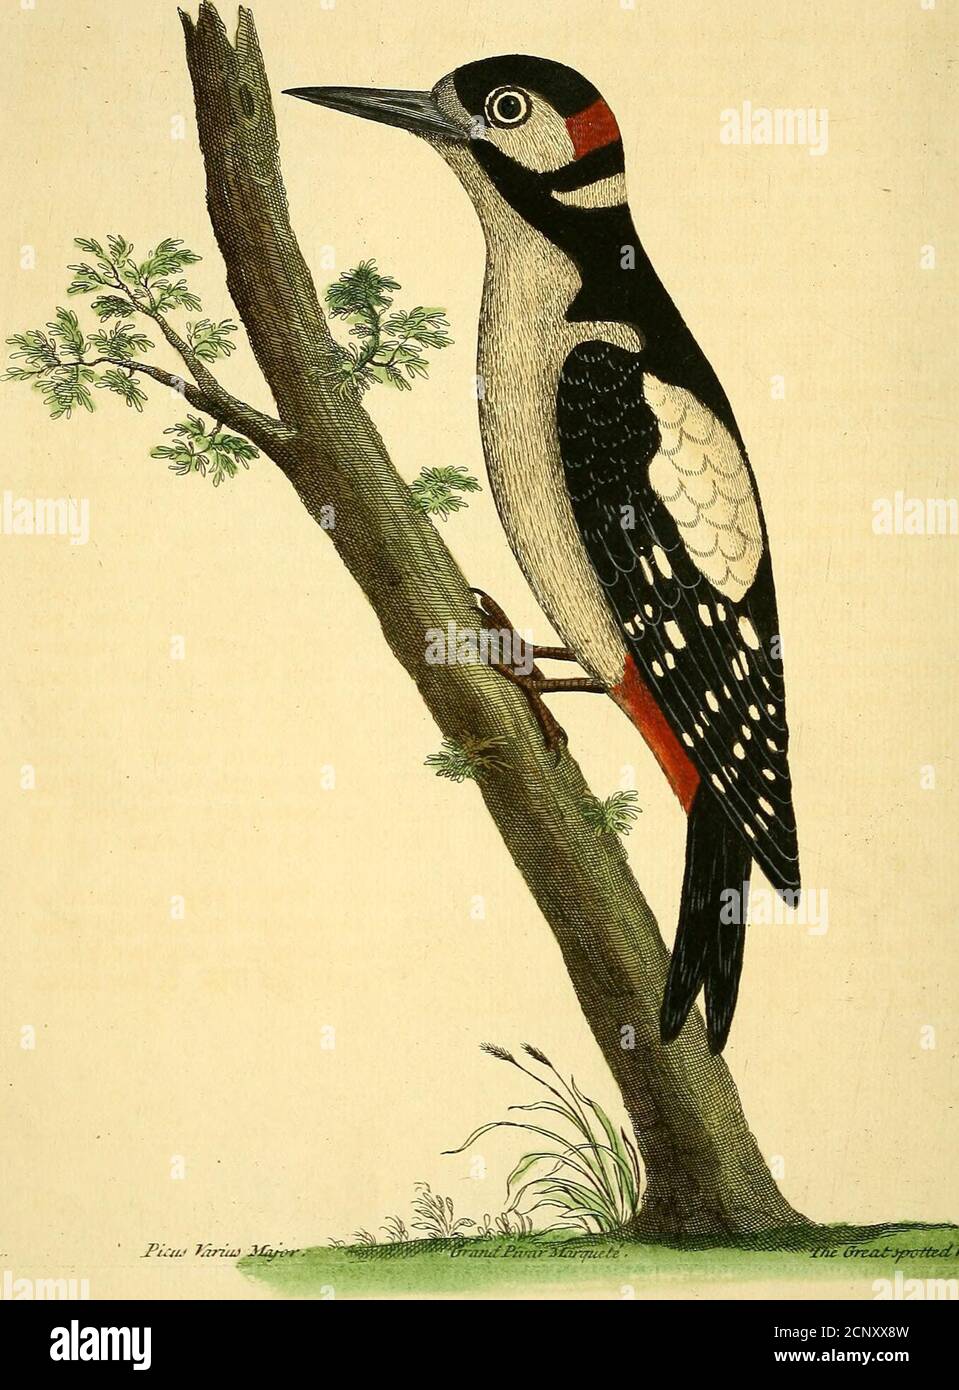 . A natural history of birds : illustrated with a hundred and one copper plates, curiously engraven from the life . ffr^^rvUmri^fre-£^:£f-i77^^vz£fp /? S K.. ///-^J-i di^ik... JPuUi. hinuJ J/^i&gt;r-.-, ffrzu^jpptteAtfbt^^ ■ ( XP ) The greater [potted Woodpecker. PIcus varius major. A&gt;&gt;. Numb. XIX. ITS Length from the tip of the Bill to the end of the Tail is ii Inches; Breadthof the Wings when extended, one Foot two Inches; Weight two Ounces and threeQuarters; the Bill an Inch and a Quarter long, ftrcight, black, thicker at the Head, andflenderer by Degrees, ending in a {harp Point, bei Stock Photo